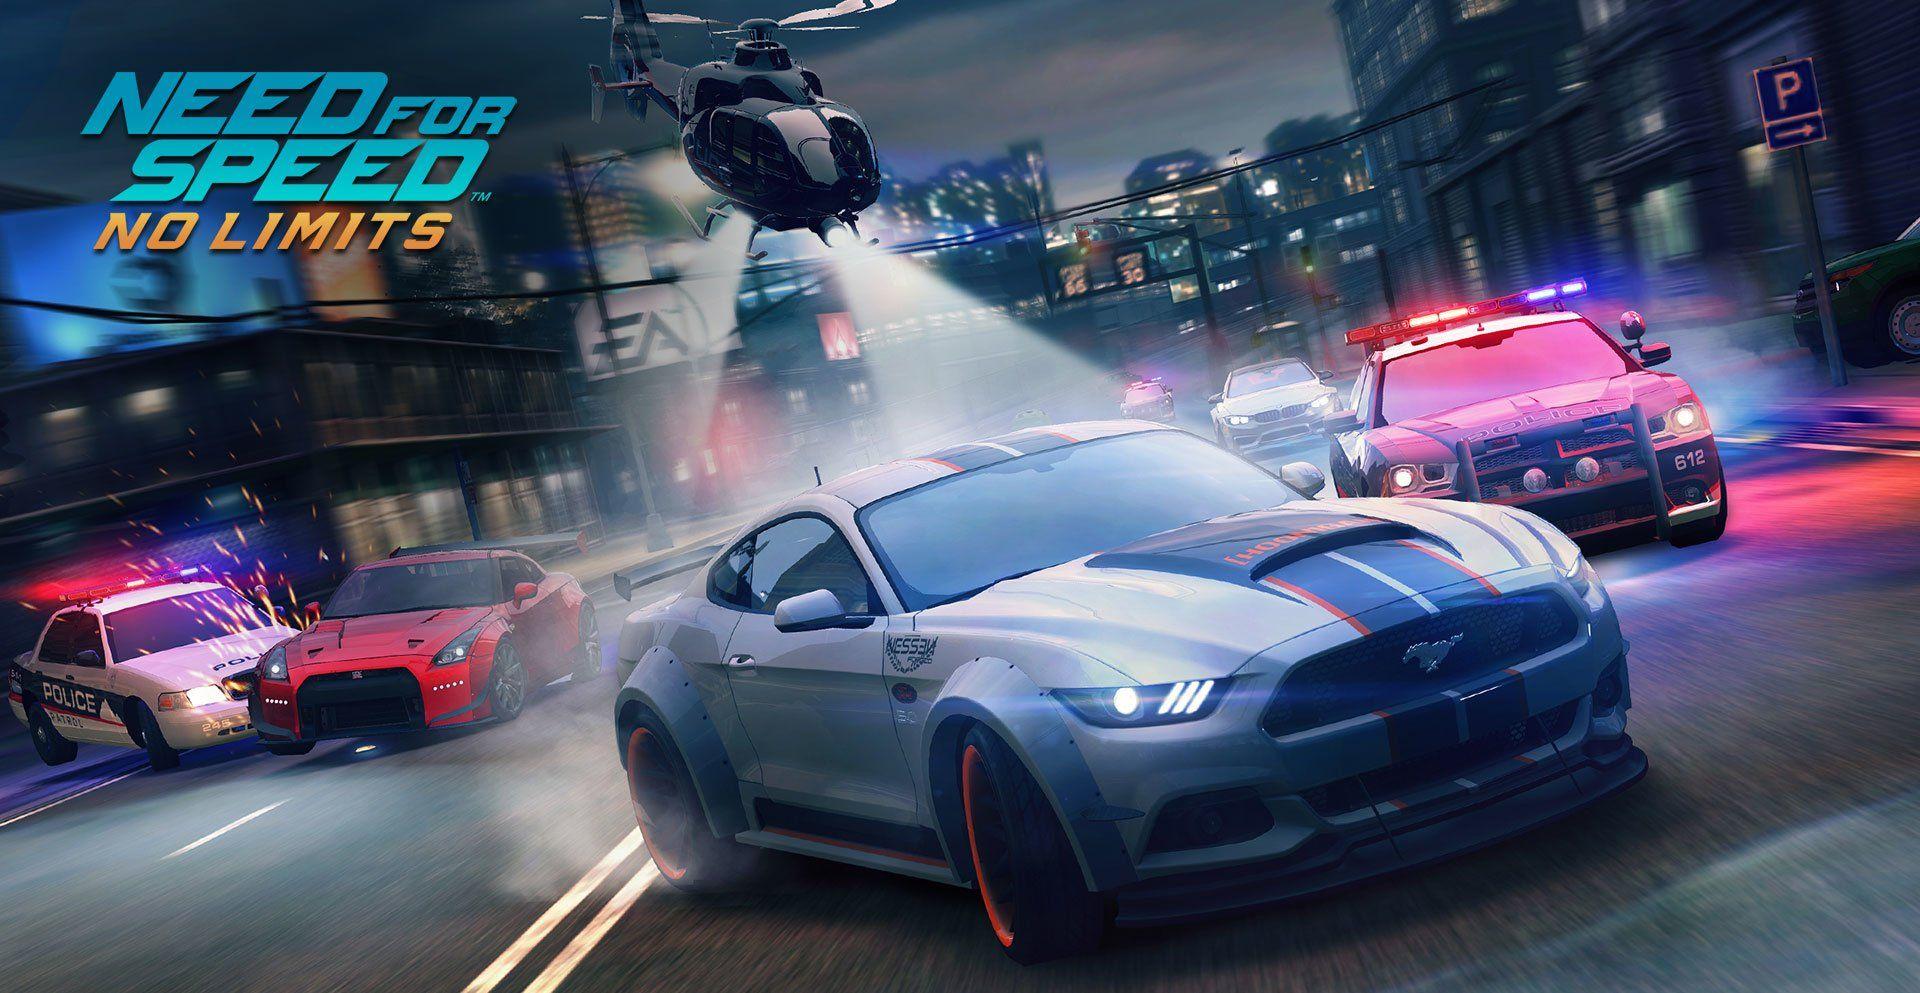 Need For Speed: No Limits HD Wallpaper. Background